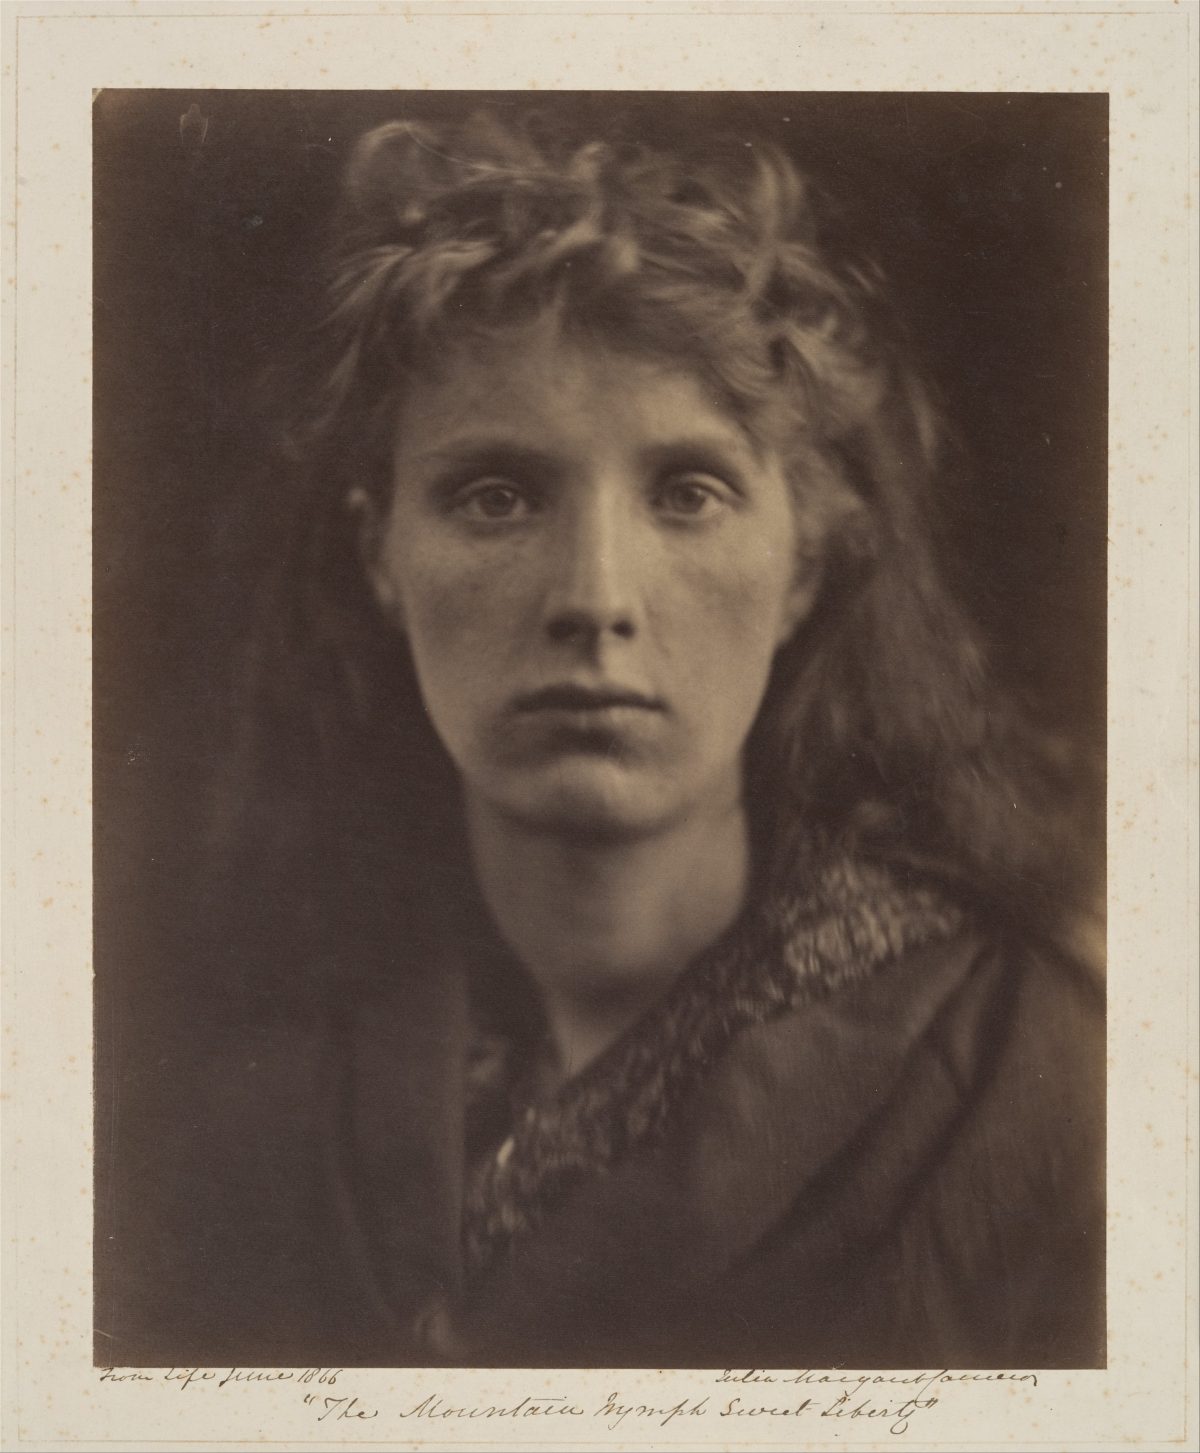 The Mountain Nymph Sweet Liberty, 1866, by Julia Margaret Cameron. Courtesy of The Met.